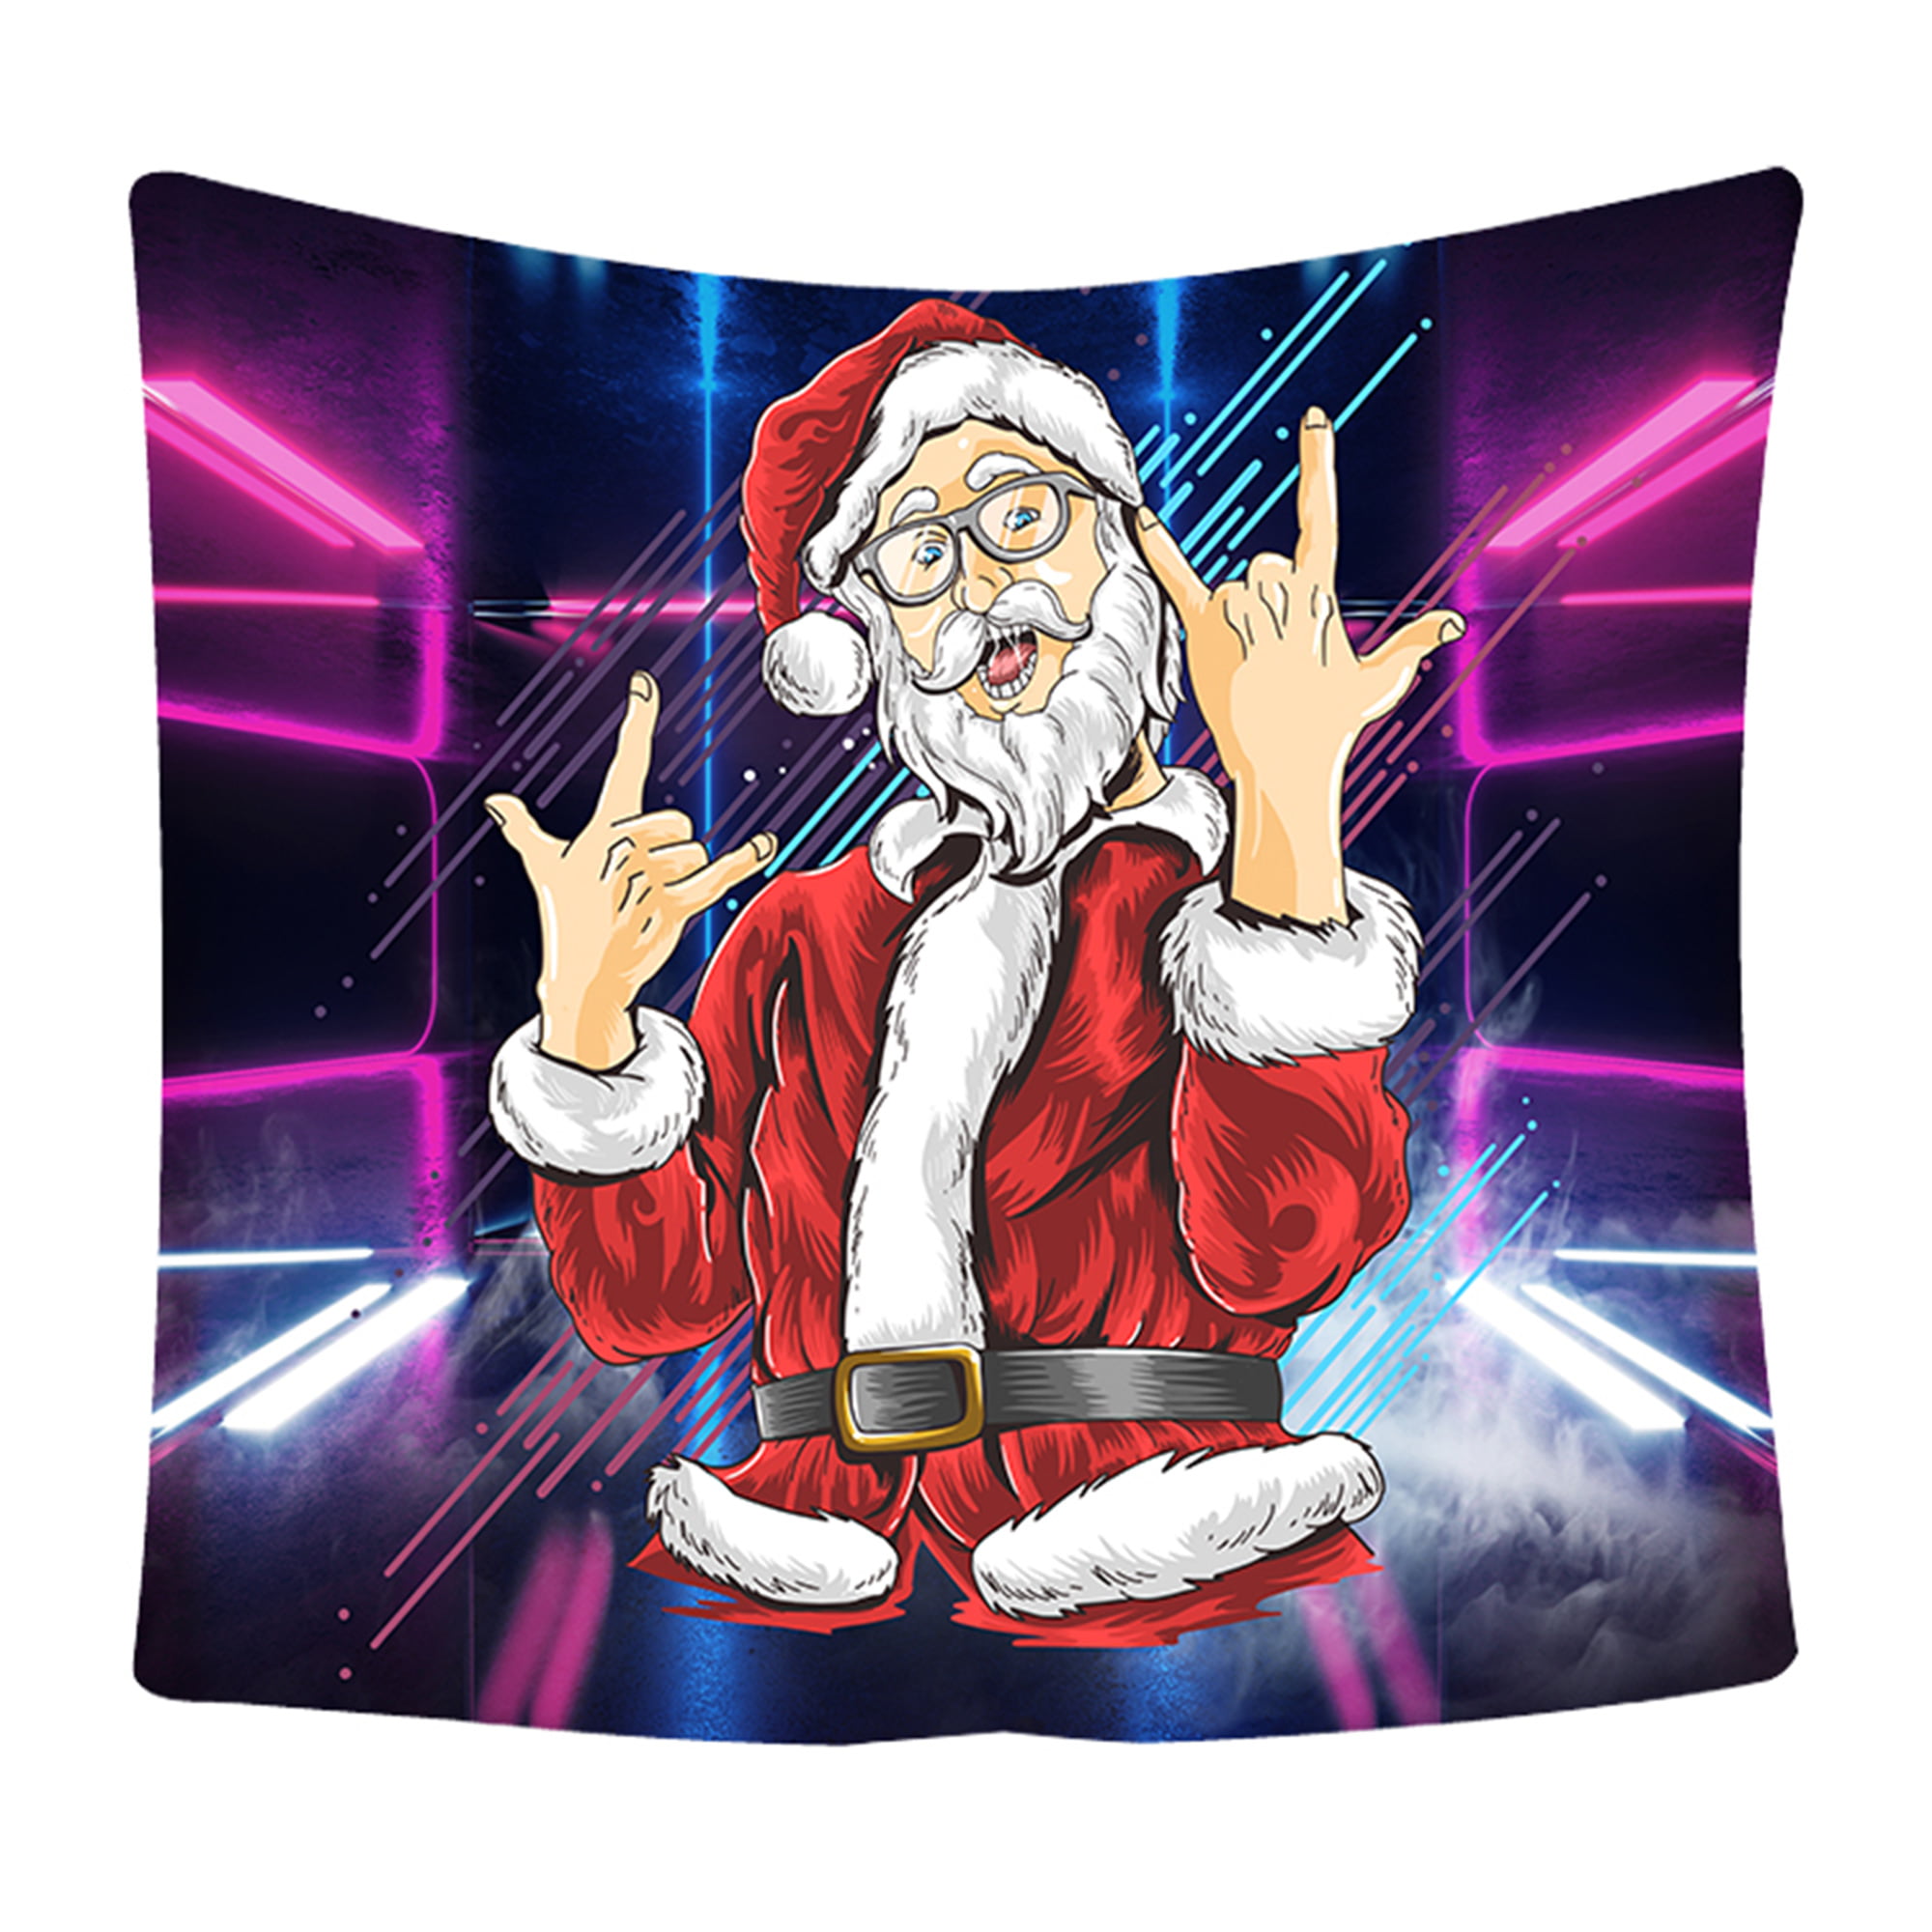 MERSARIPHY Funny Christmas Tapestry Cool DJ Santa Claus Wall Hanging  Tapestry for Bedroom Living Room, Dorm 